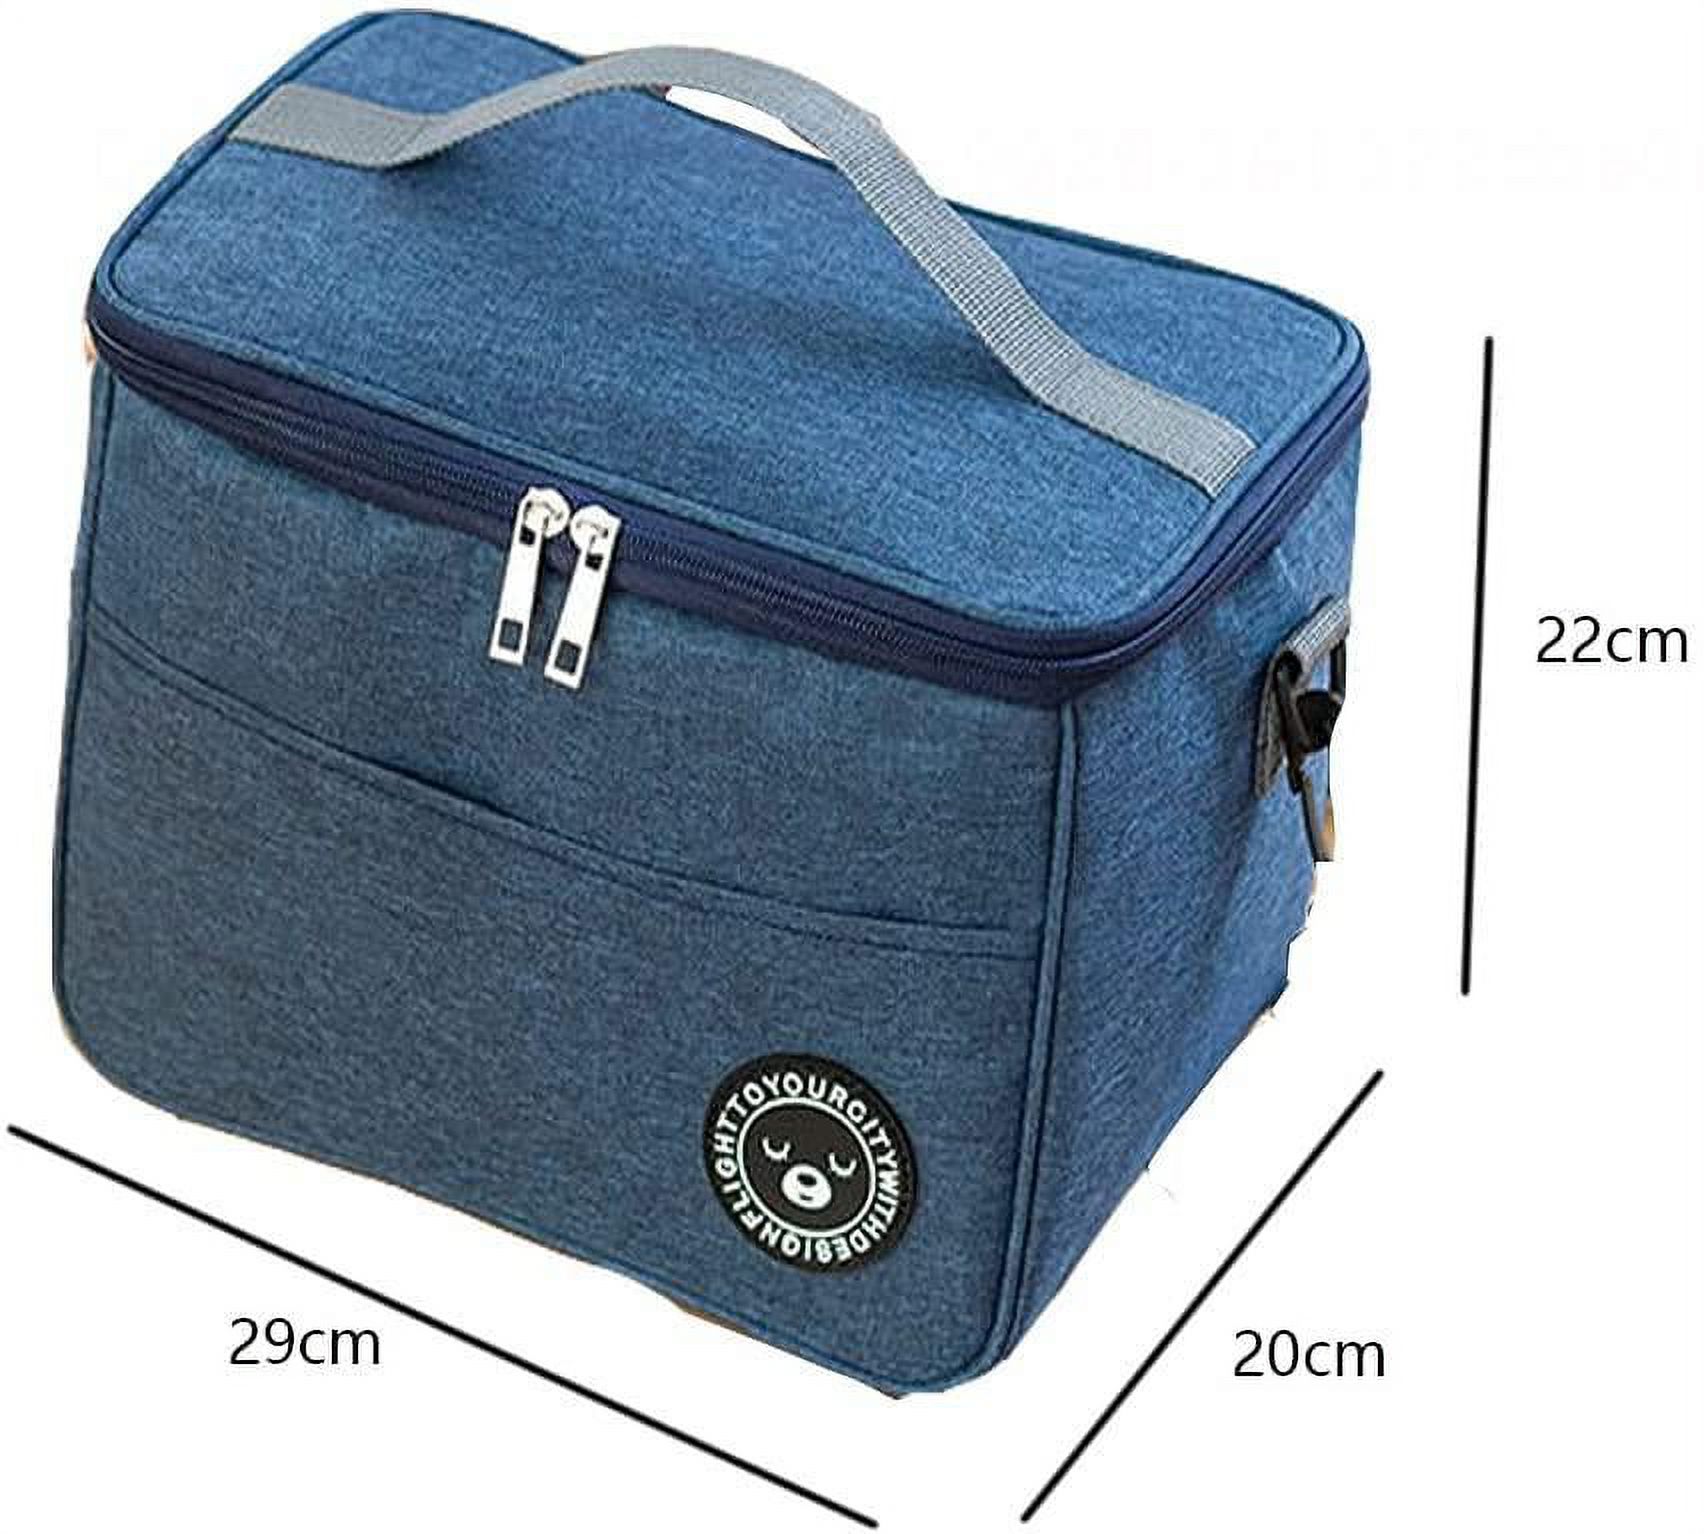 Picnic bag cooler bag classic cooler bag with insulated bag lunch bag foldable lunch bag insulated bag cooler bag lunch cooler for camping outdoor travel - image 4 of 6